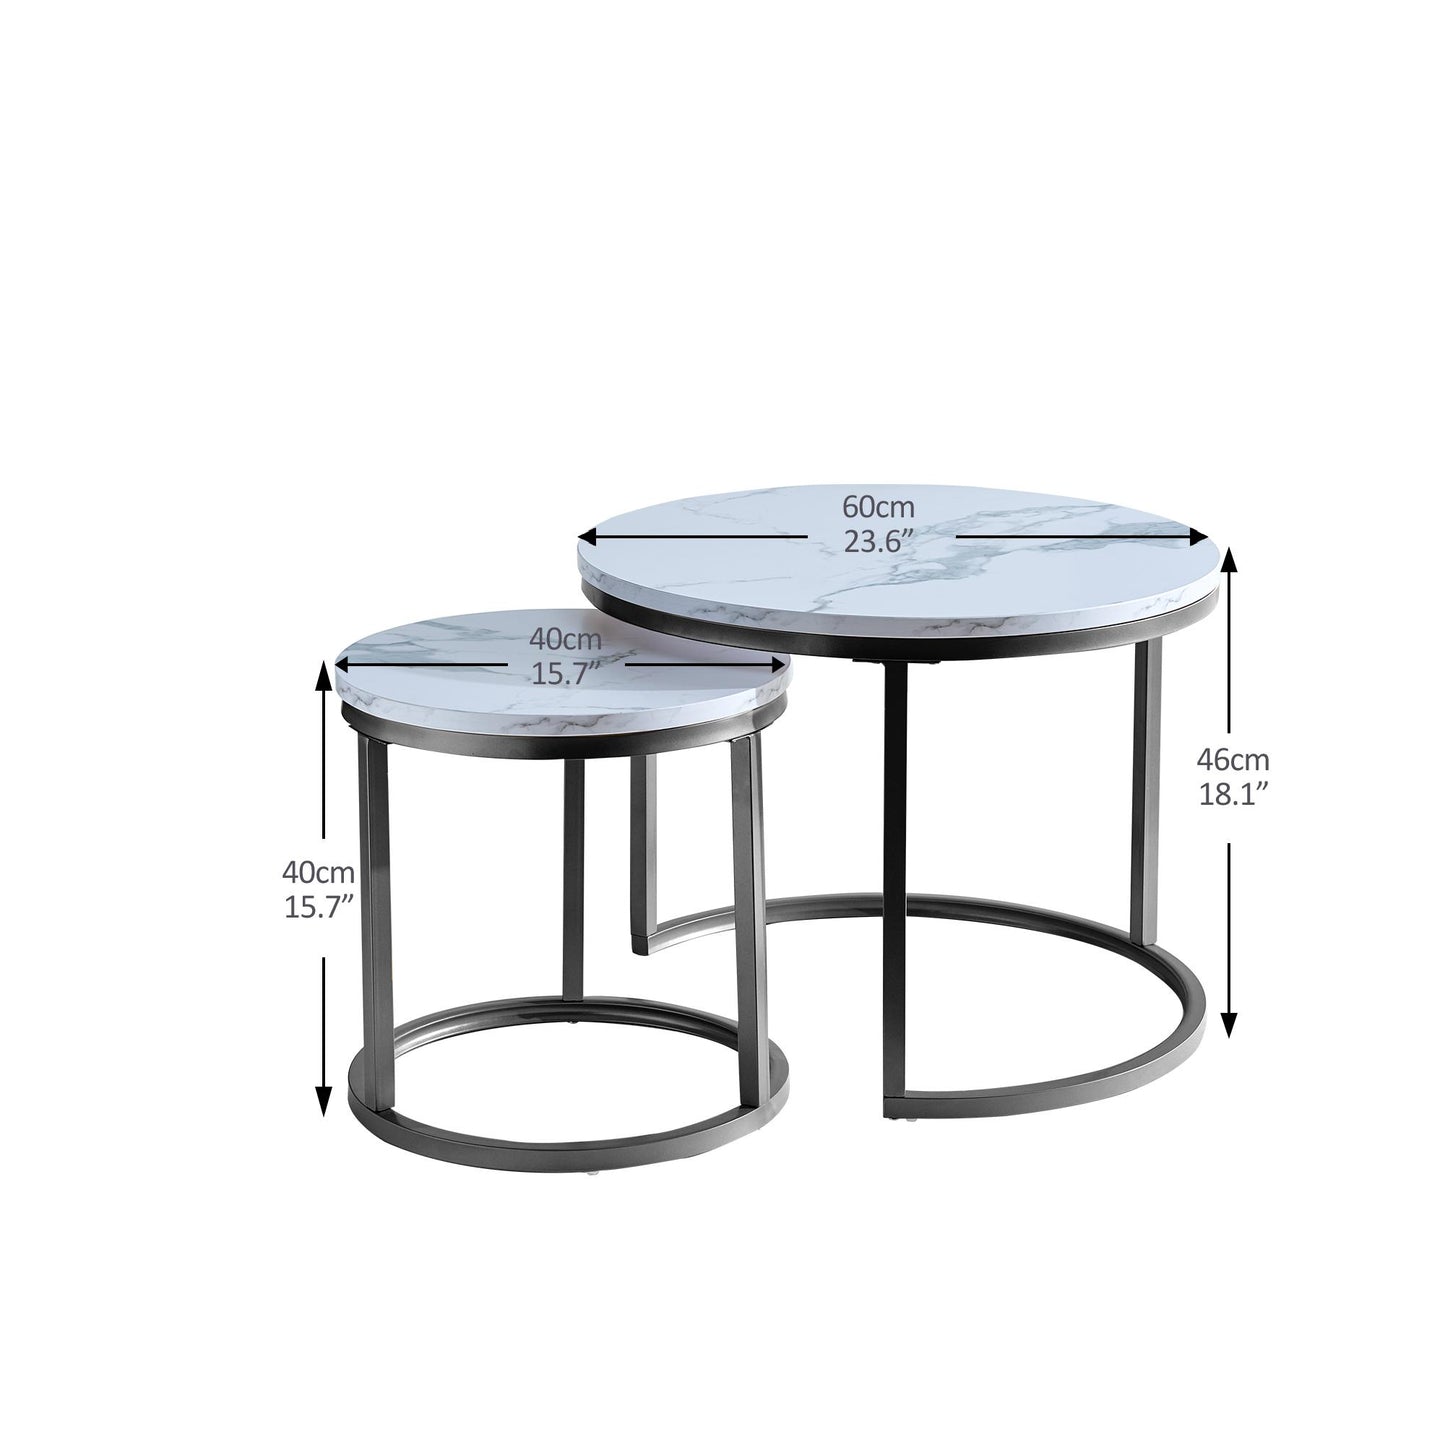 Modern Nesting coffee table,Black metal frame with marble color top-23.6”